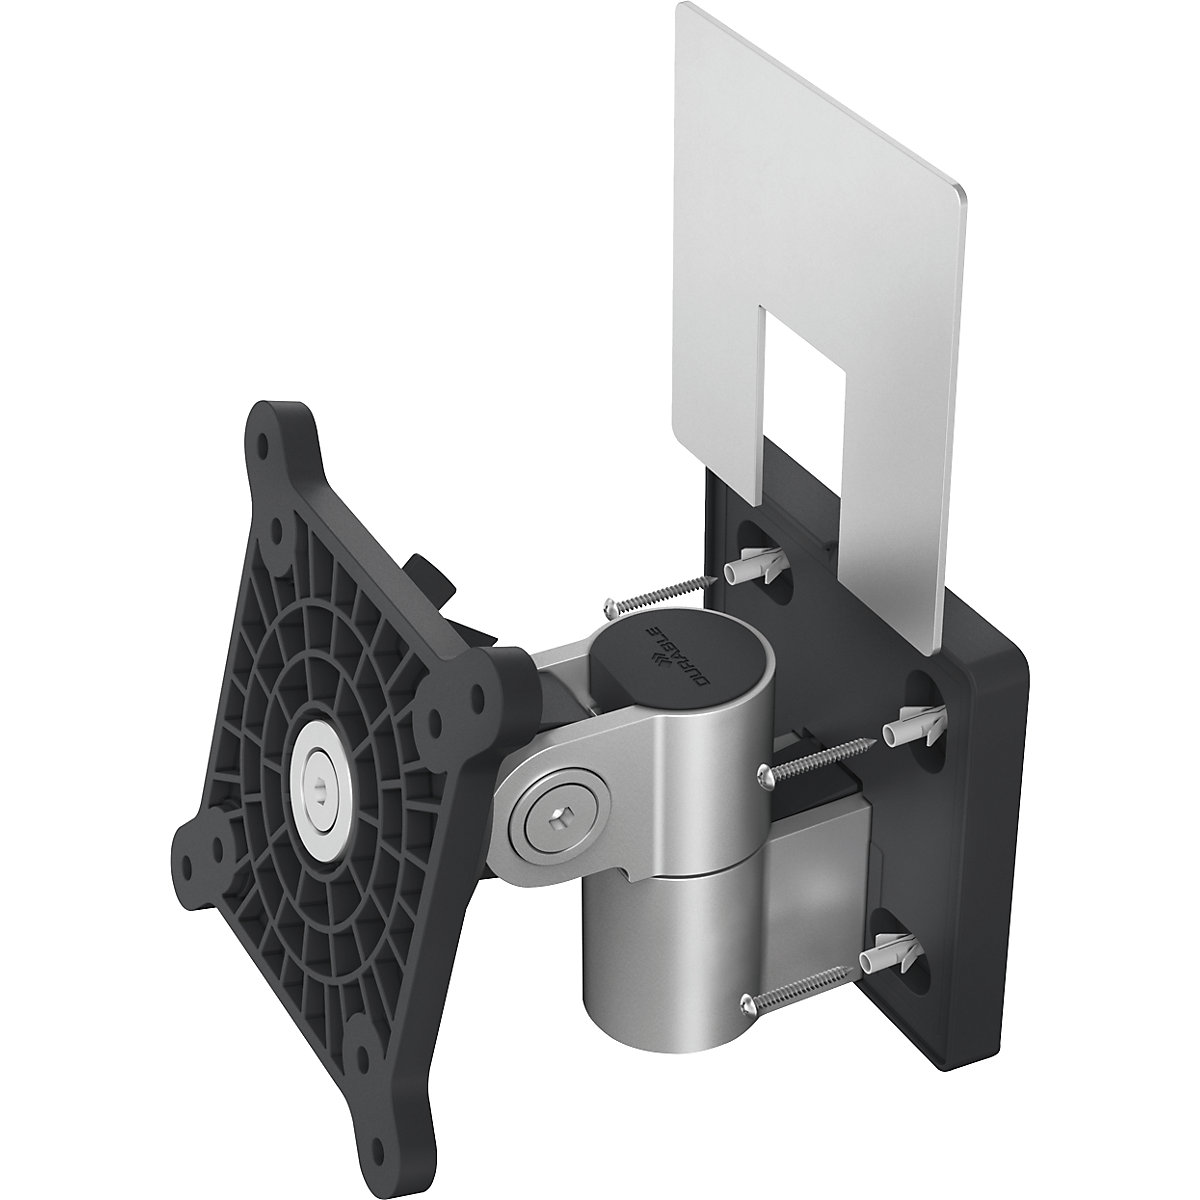 Monitor wall mounting bracket for 1 monitor – DURABLE